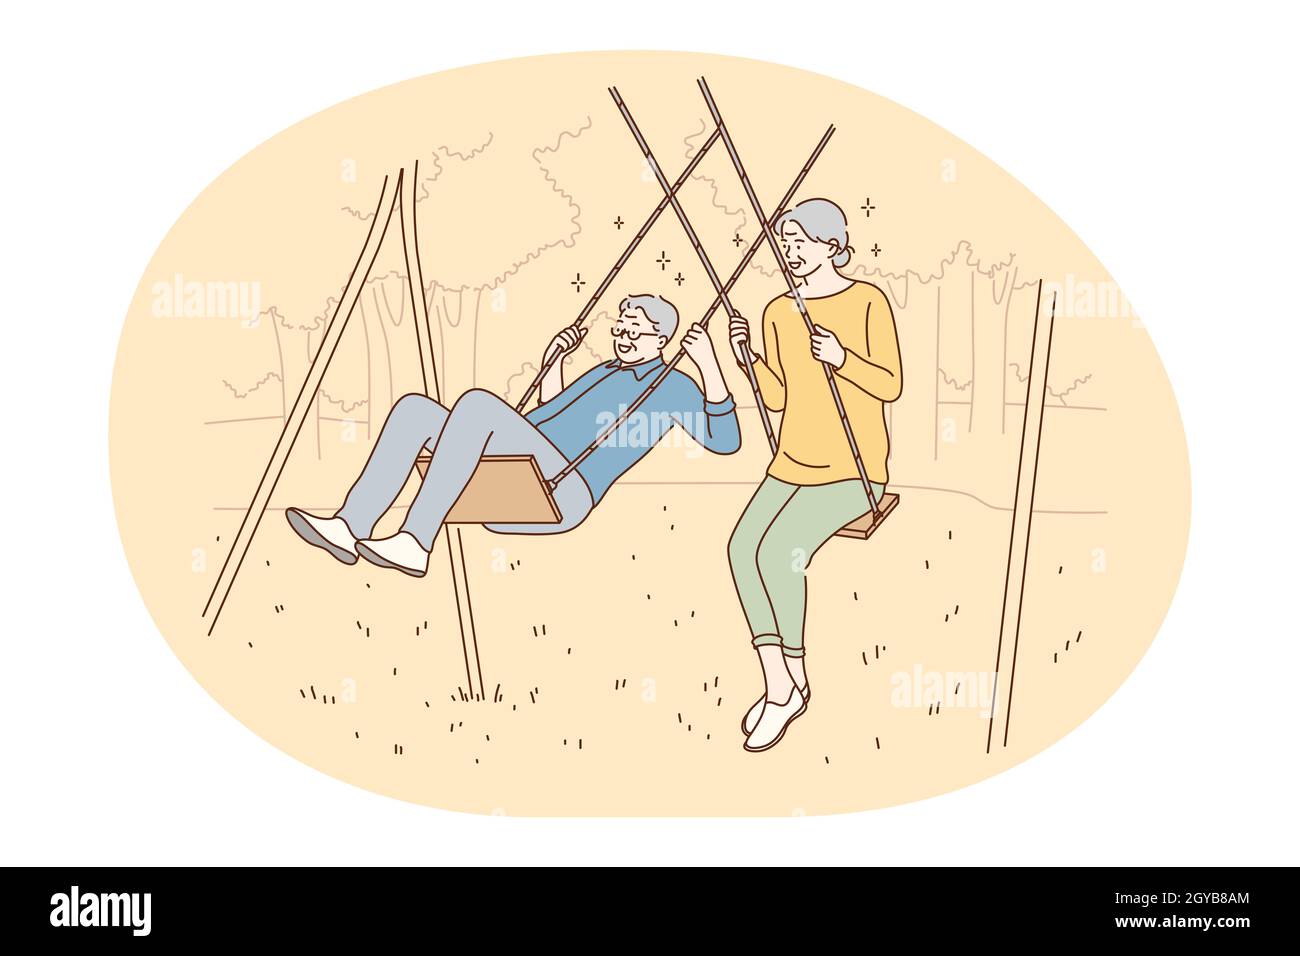 Senior elderly couple living happy active lifestyle concept. Happy mature loving couple pensioners woman and man riding on swing and having fun like c Stock Photo